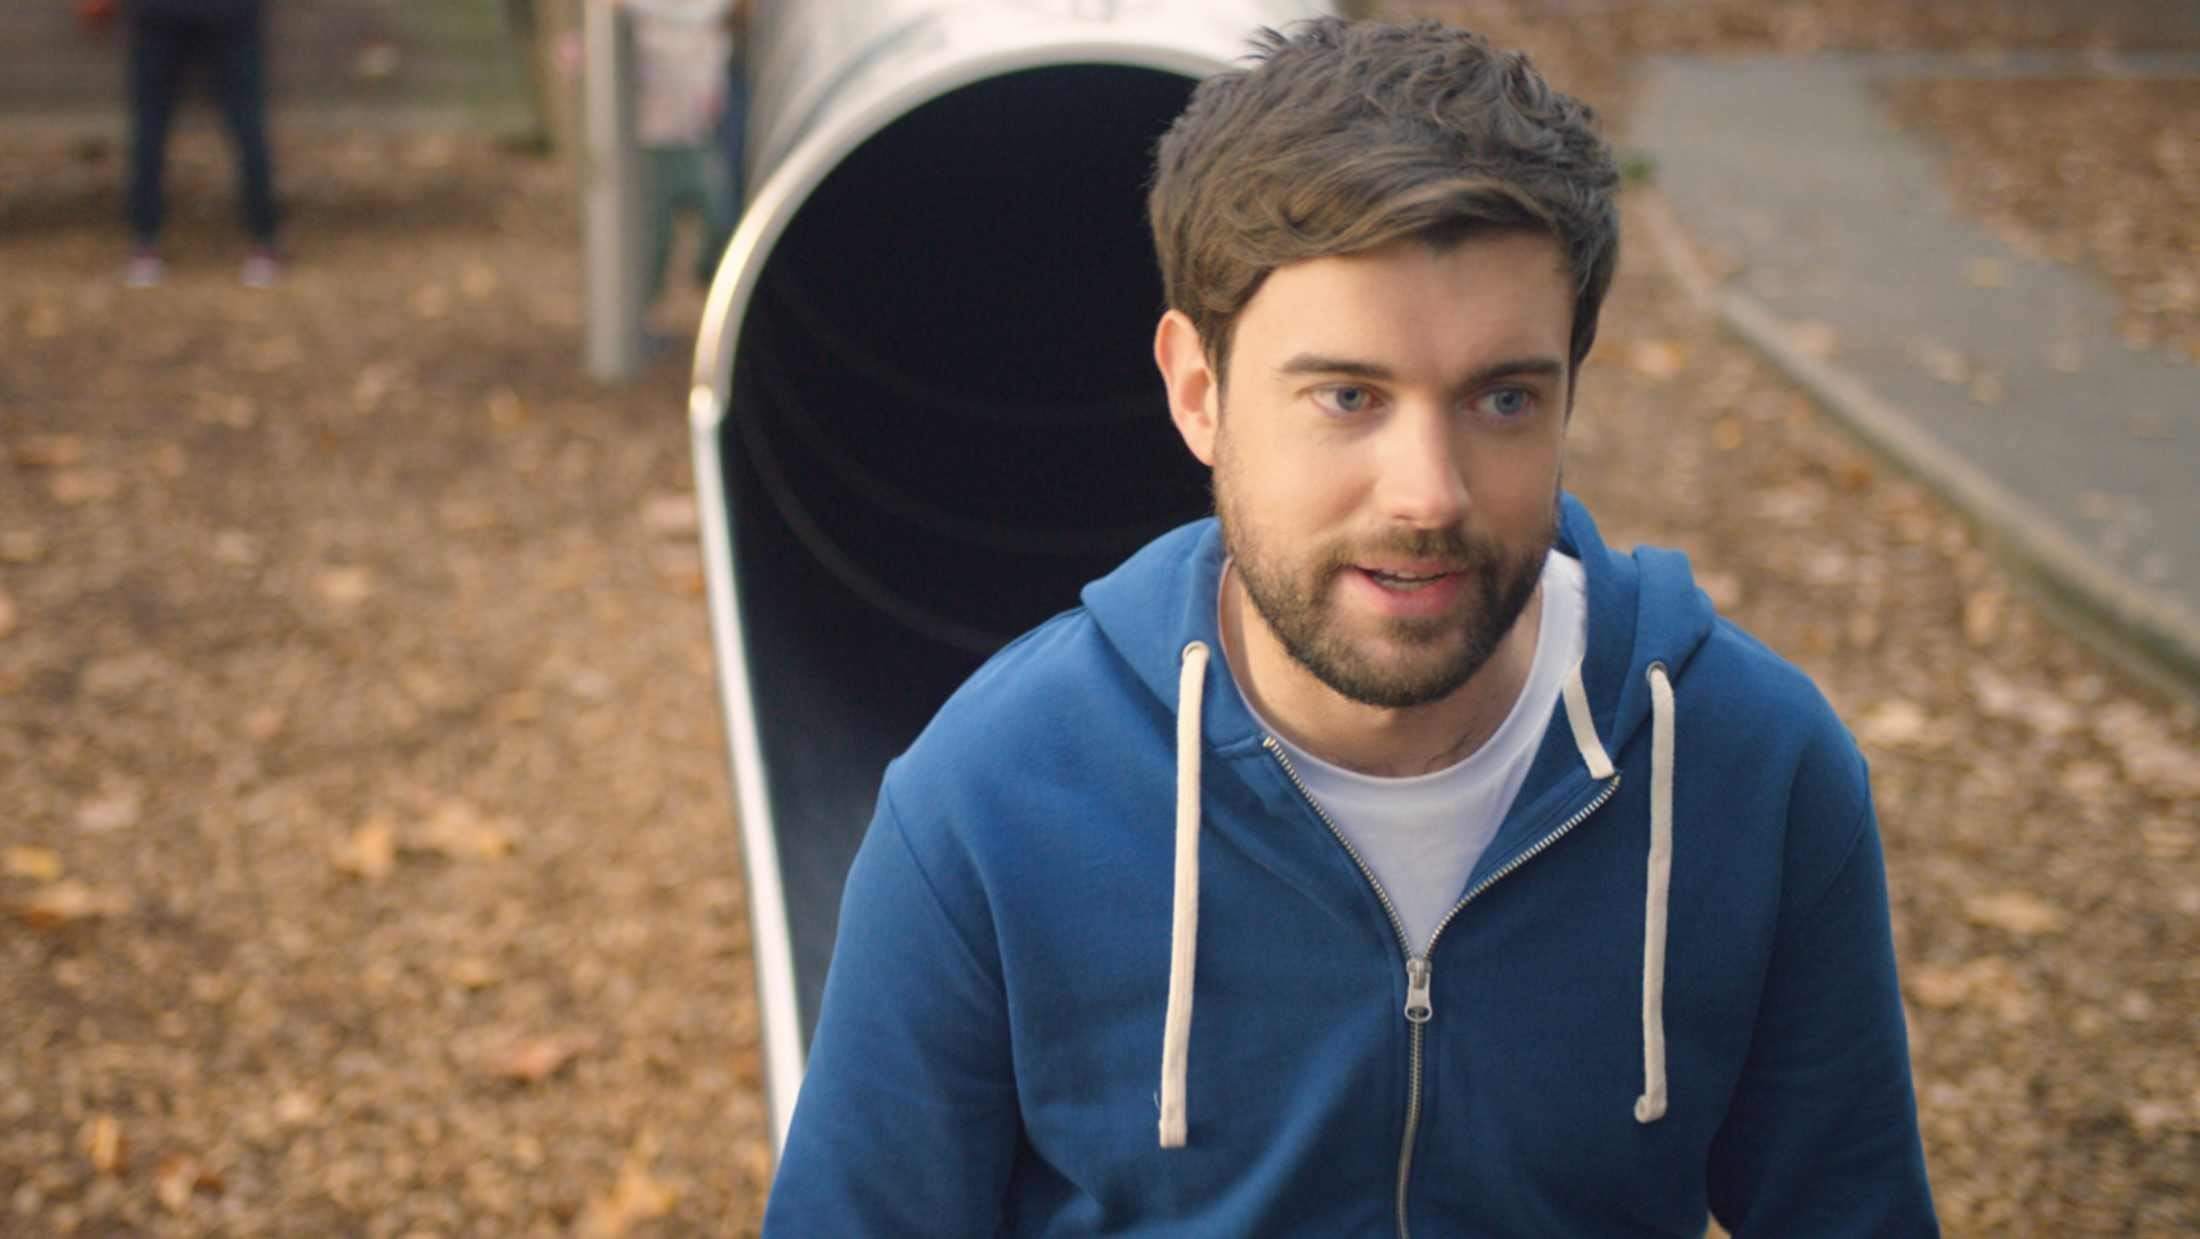 Jack Whitehall at the foot of a play slide